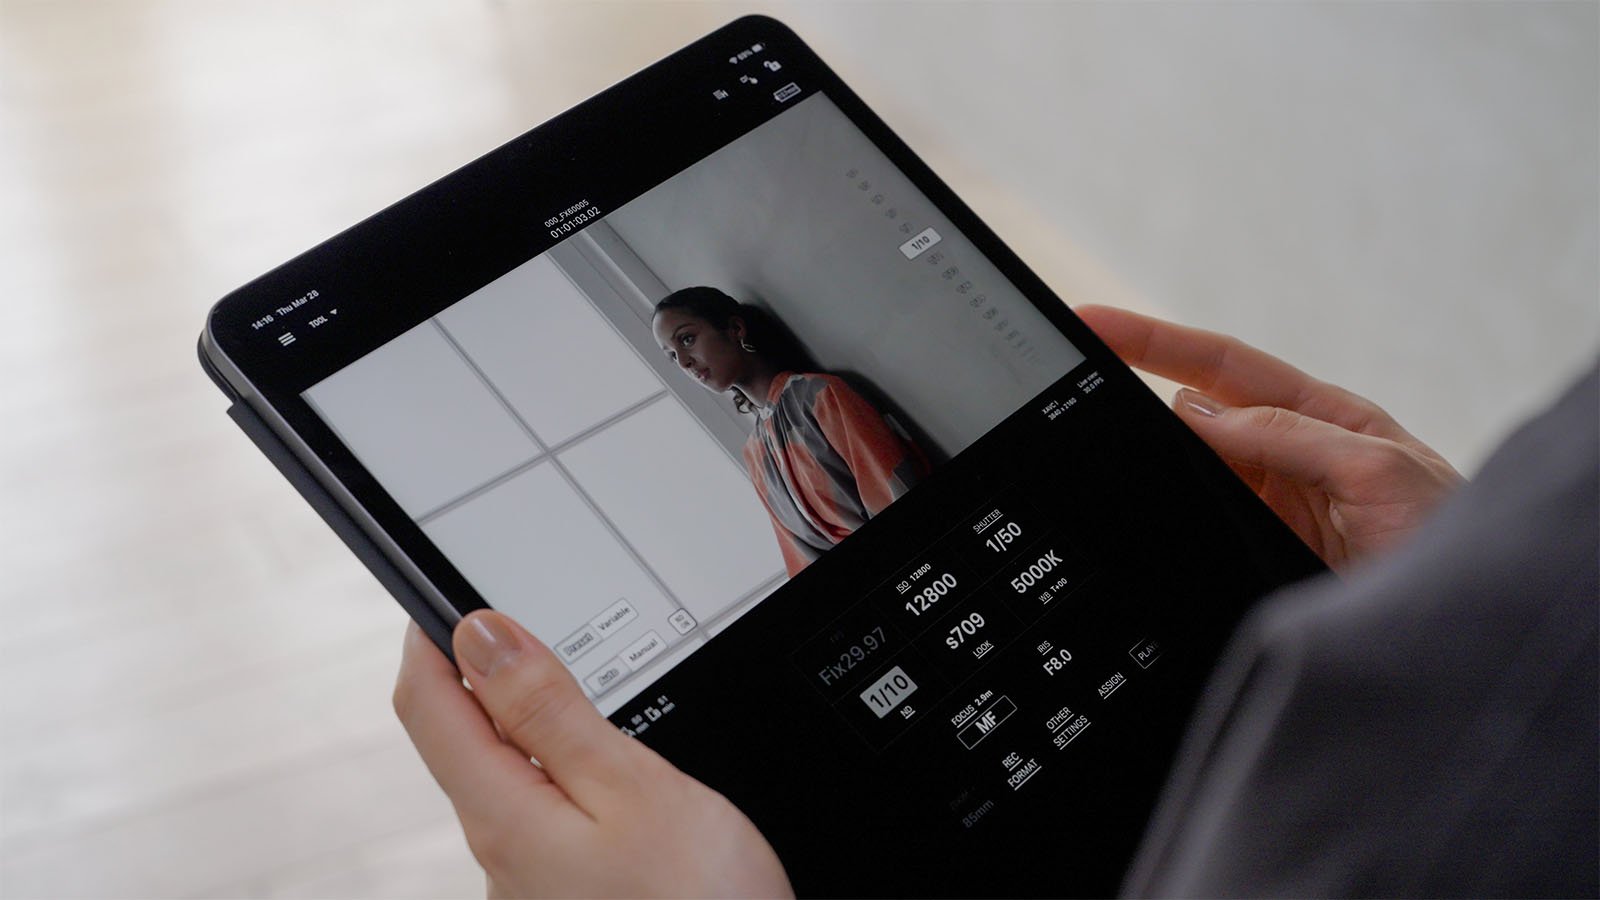 A person holds a tablet displaying a photo editing interface. The screen shows an image of a person standing by a window, wearing a striped shirt. Editing options and settings, such as ISO, white balance, and shutter speed, are visible on the tablet screen.